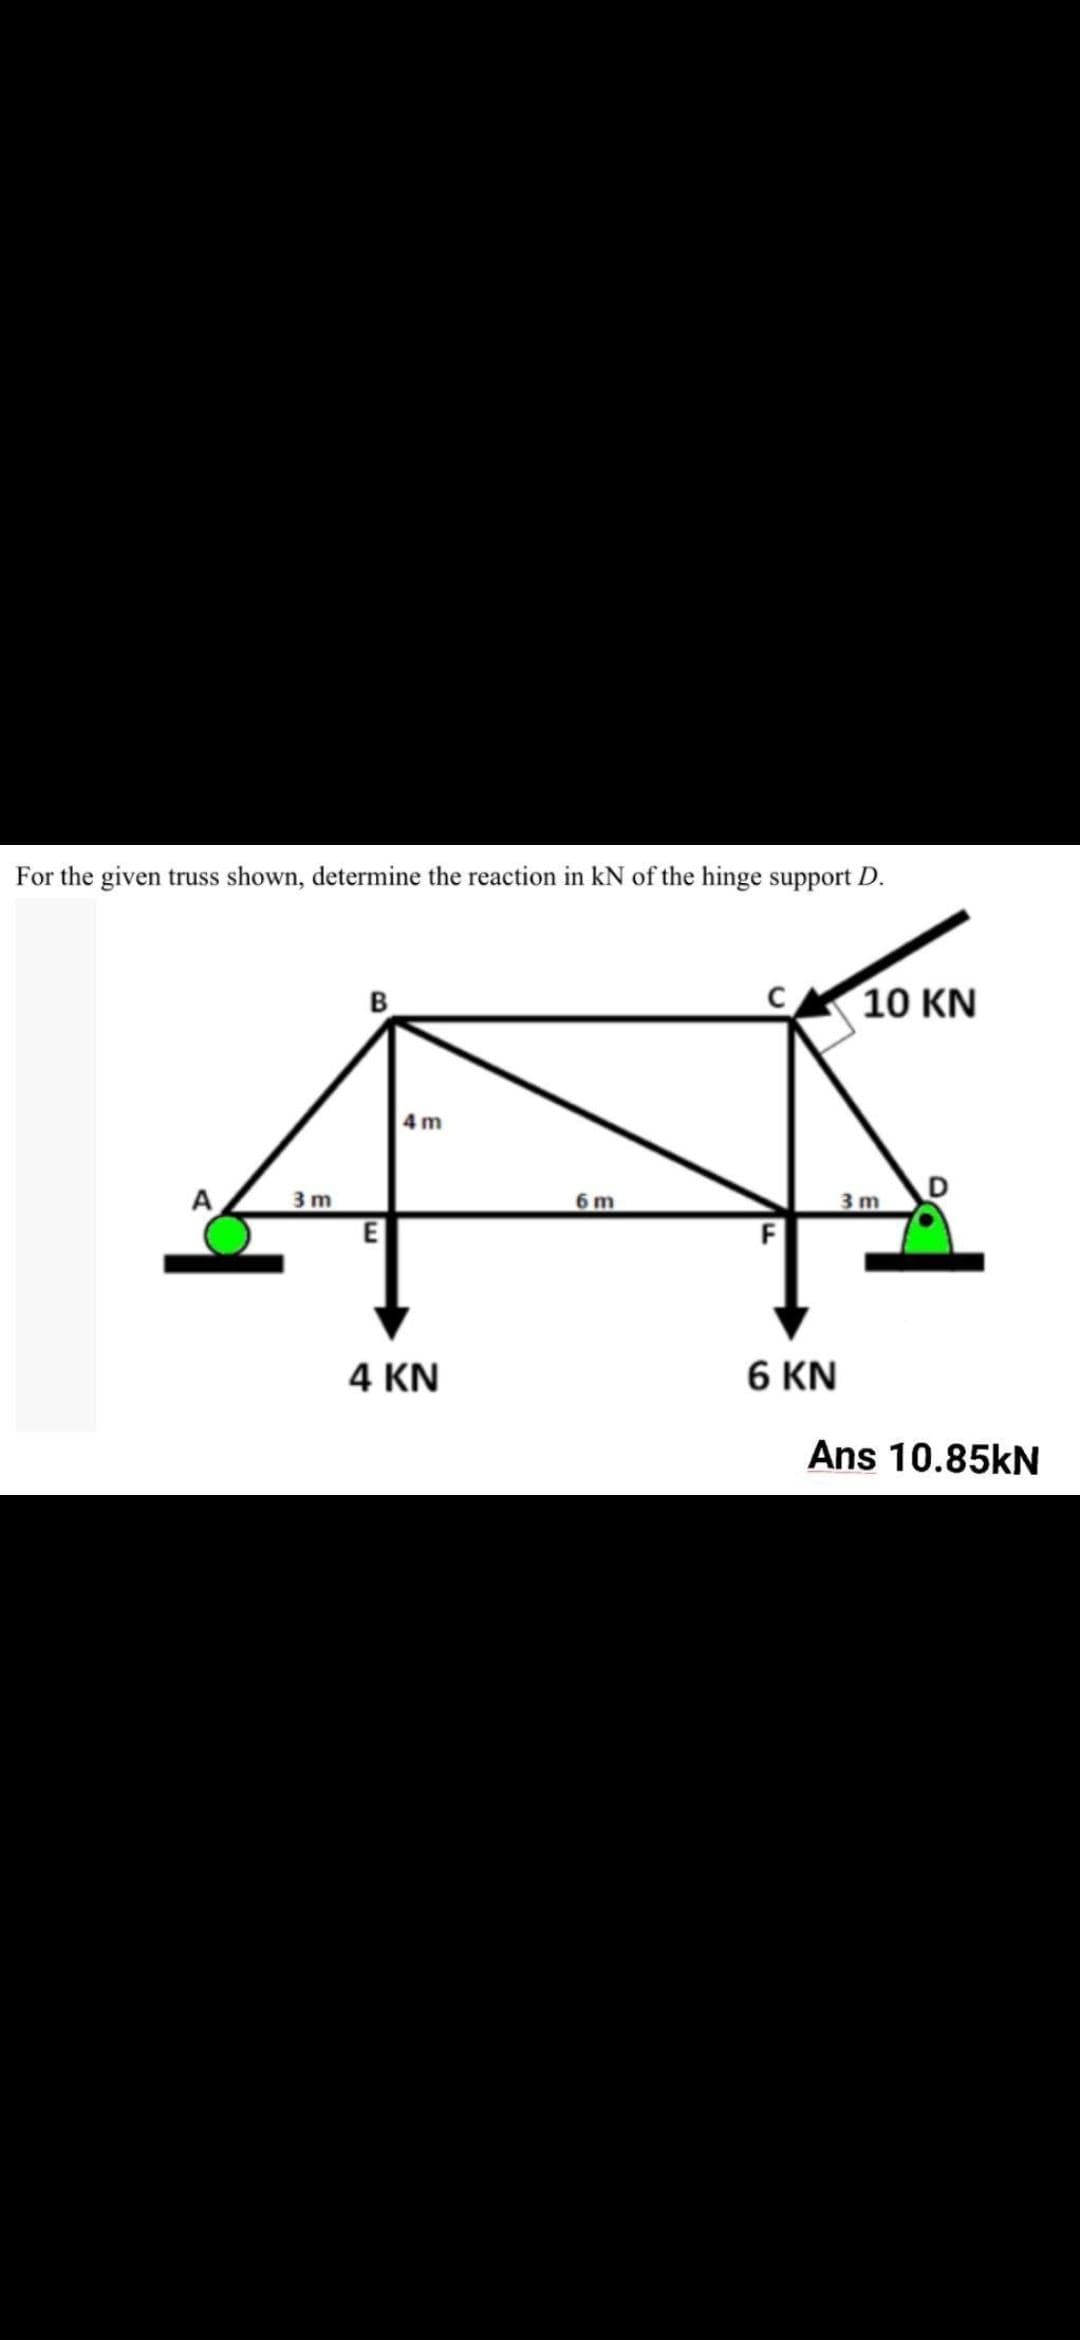 For the given truss shown, determine the reaction in kN of the hinge support D.
B
10 KN
4 m
A
3 m
6 m
3 m
4 KN
6 KN
Ans 10.85kN
